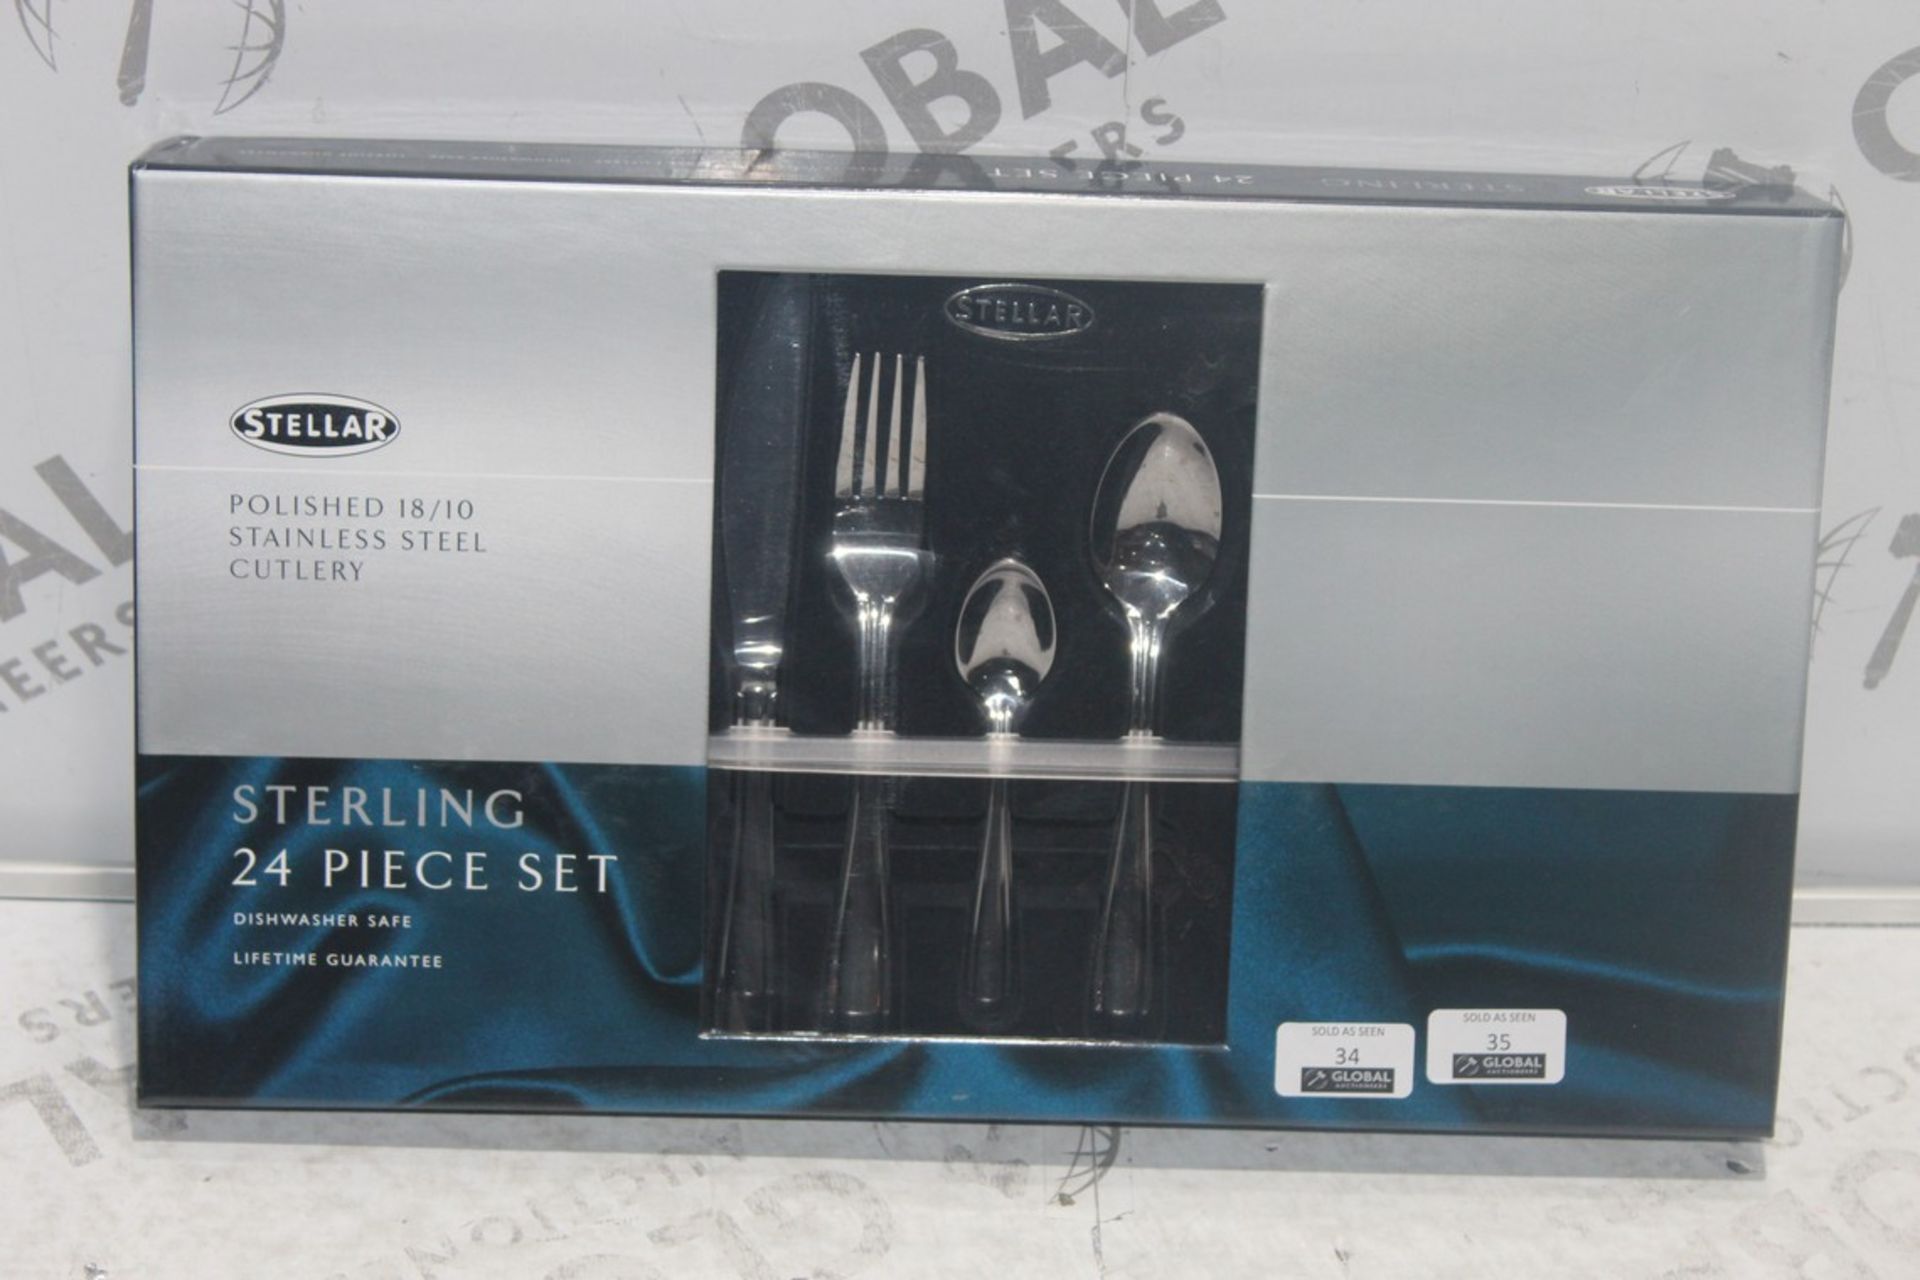 Boxed Stella Sterling Polished Stainless Steel 24 Piece Cutlery Set RRP £55 (Public Viewing and